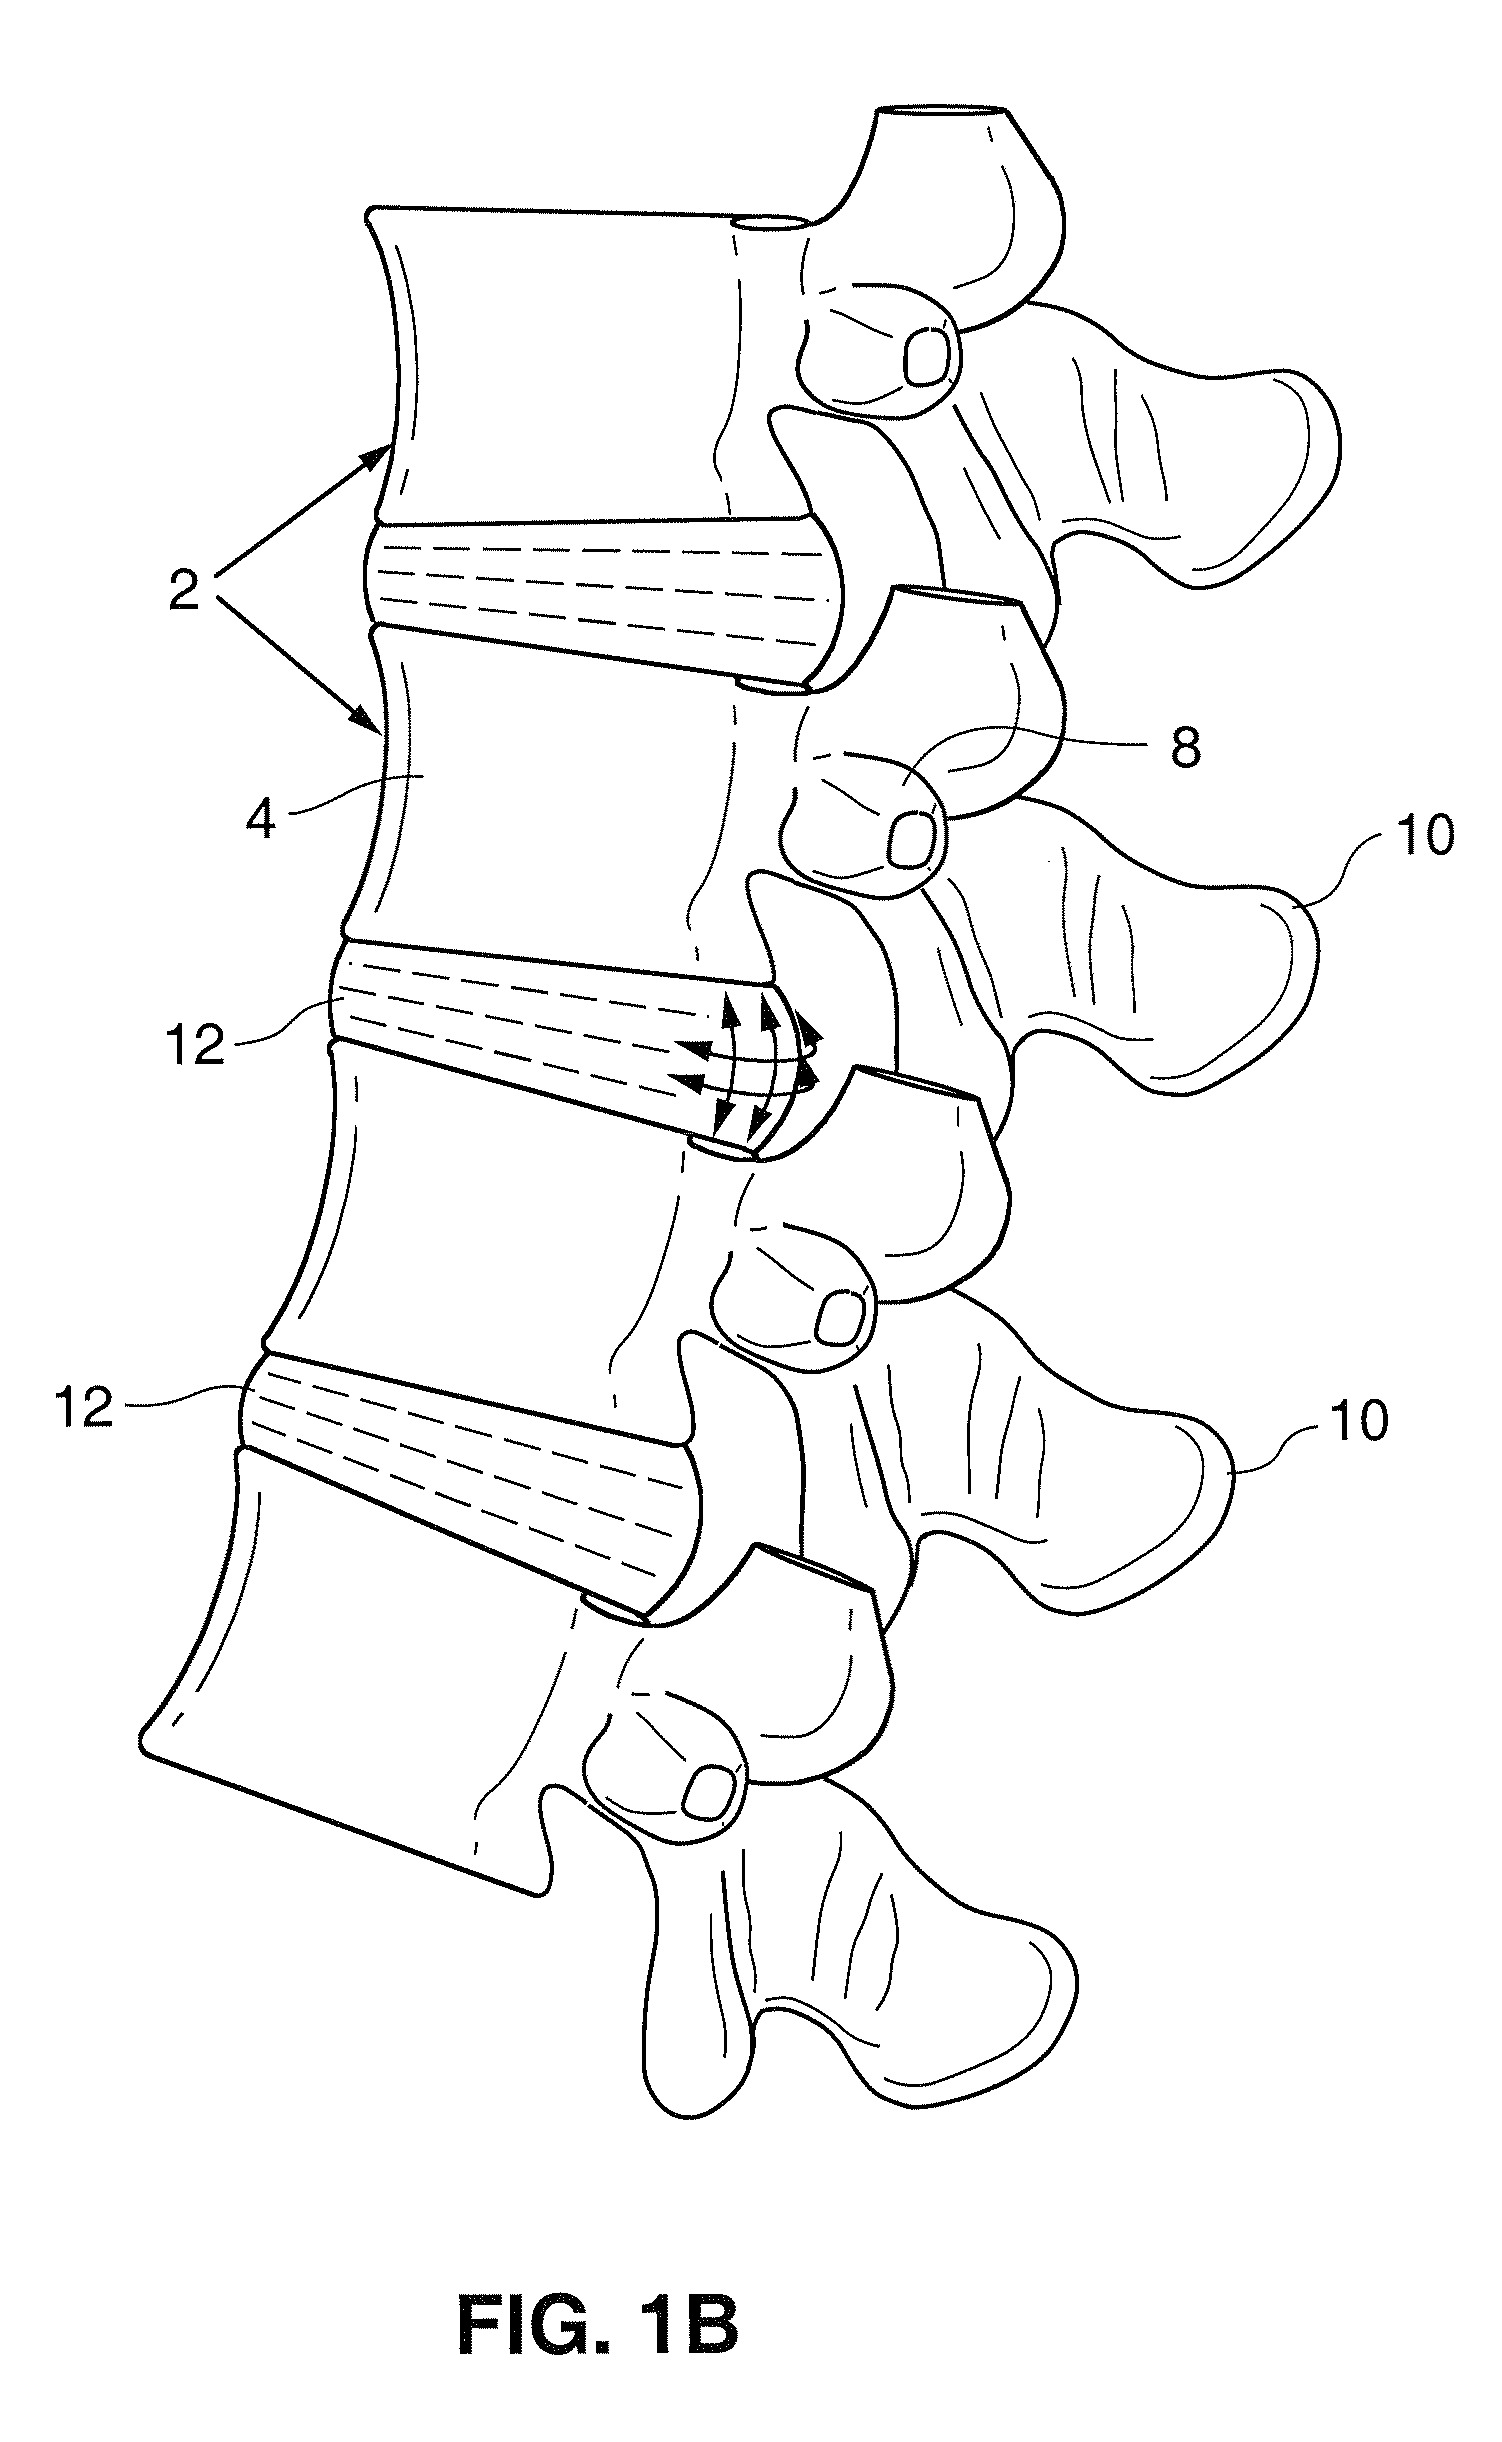 Spinal implant and method for restricting spinal flexion